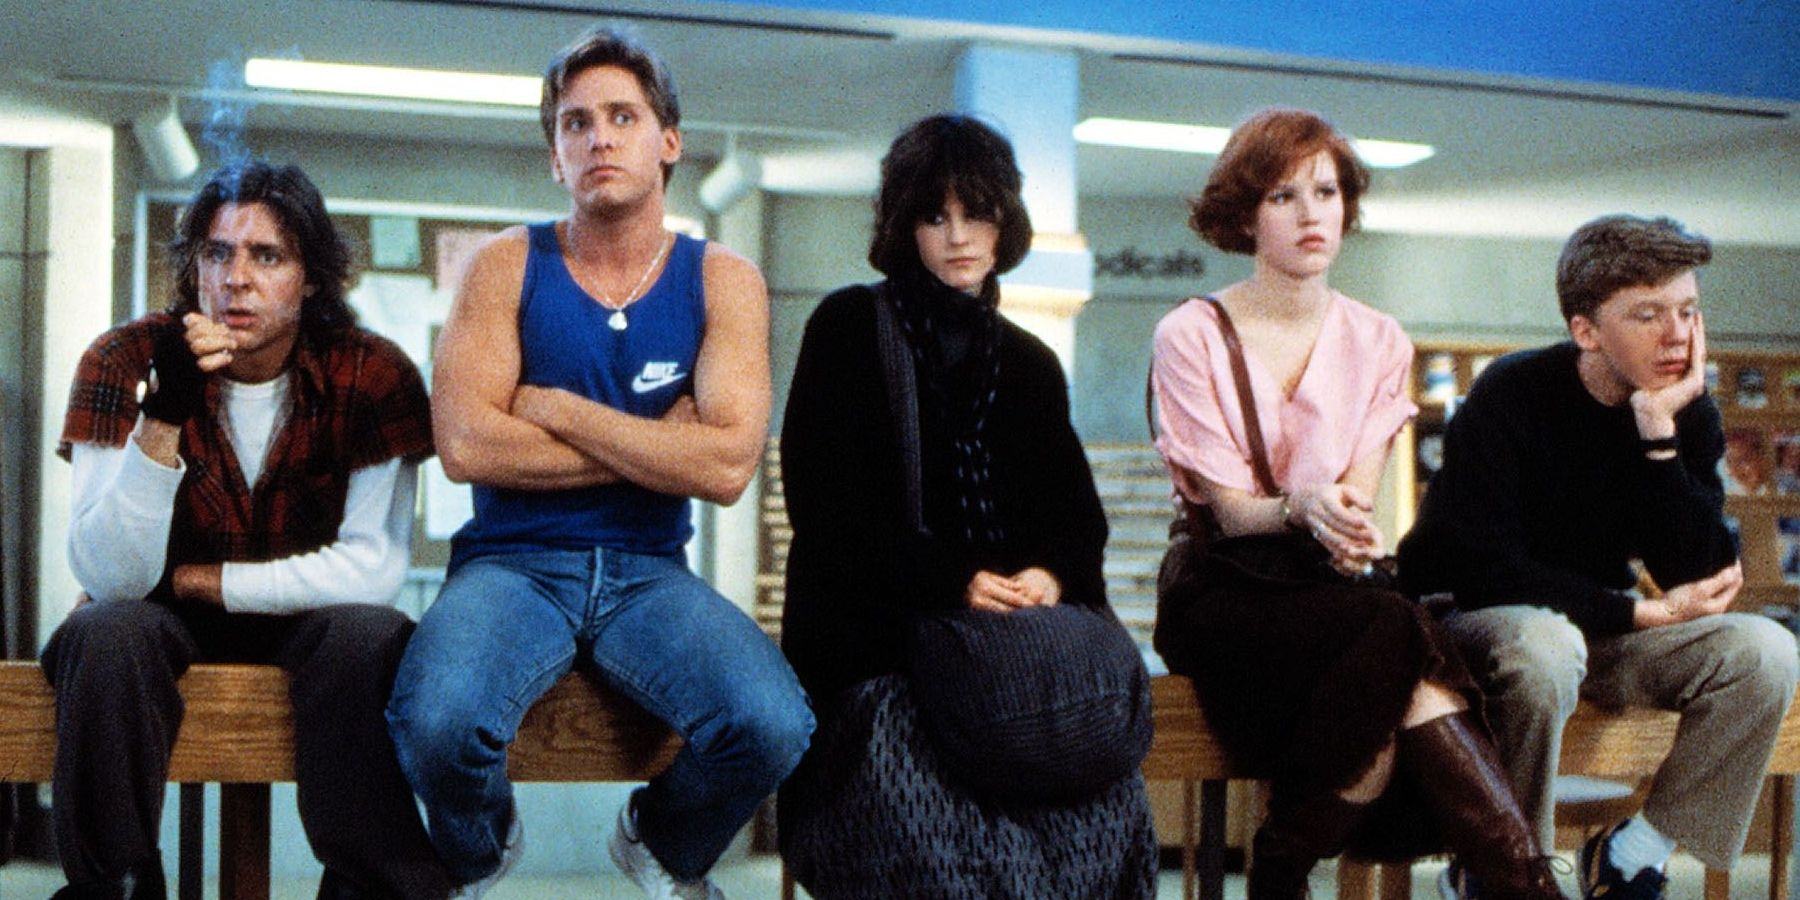 The Breakfast Club takes place at the table.